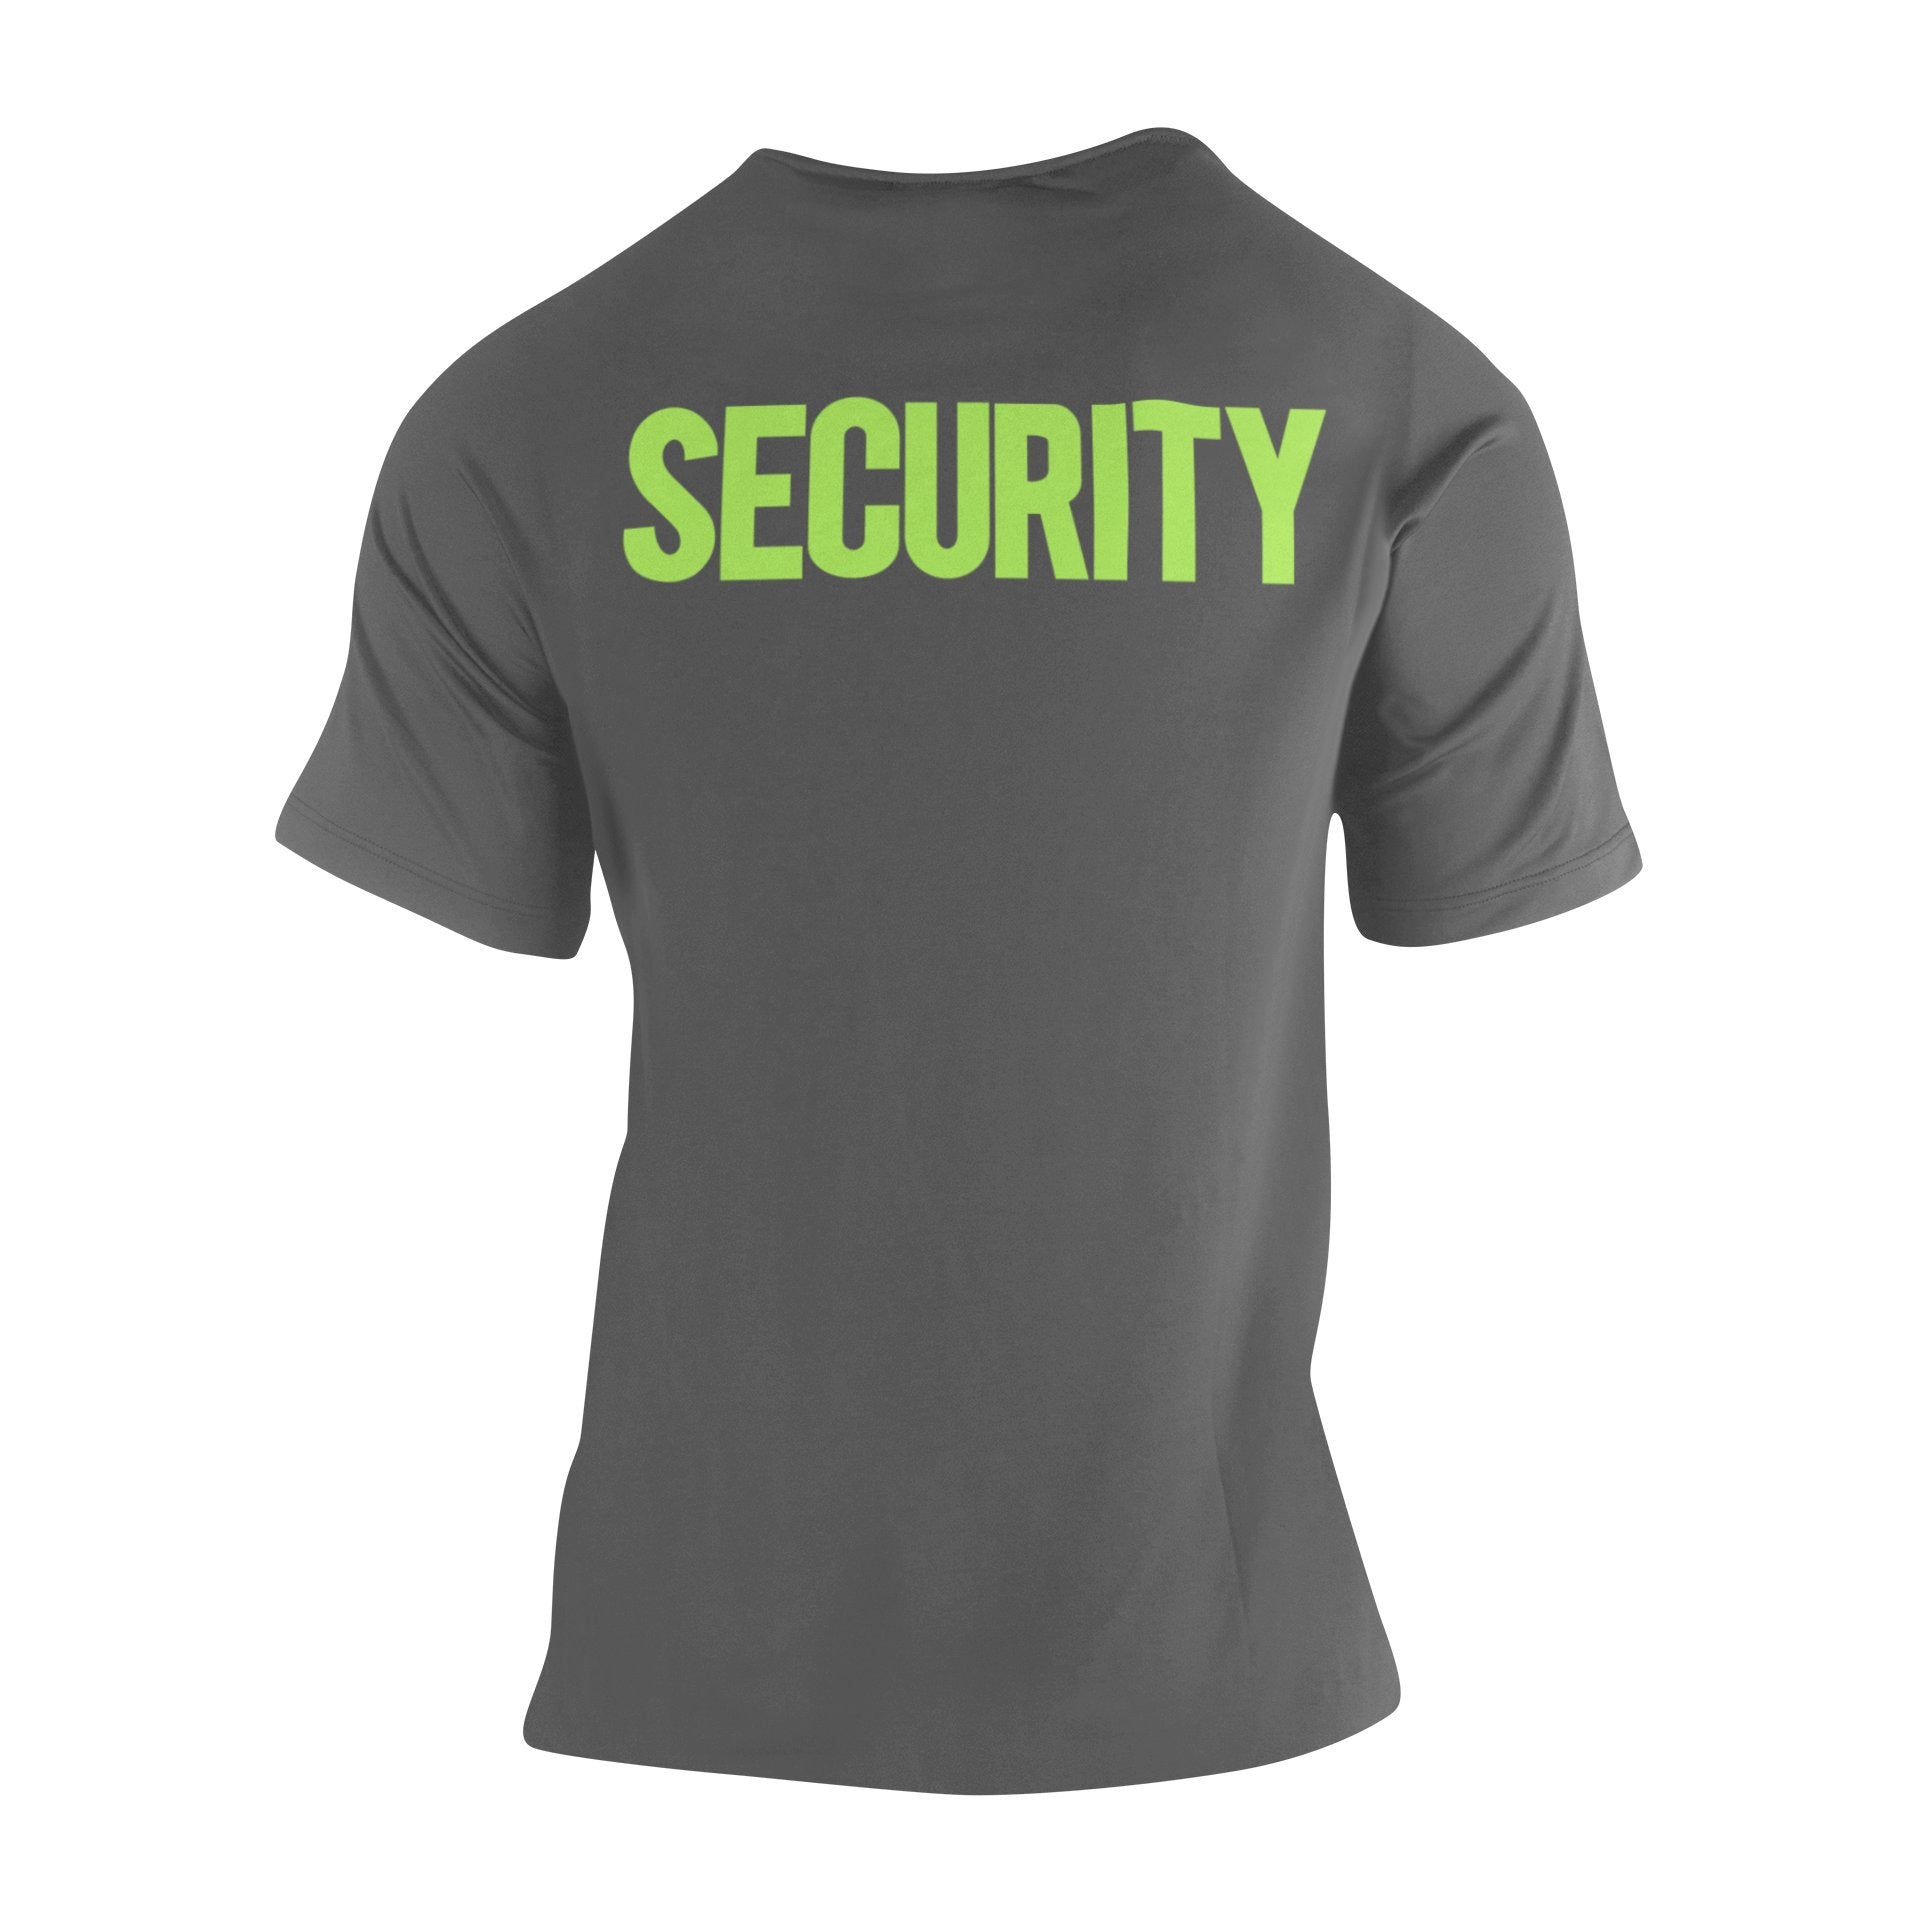 Men's Security Tee (Solid Design, Front & Back Print, Charcoal & Neon)